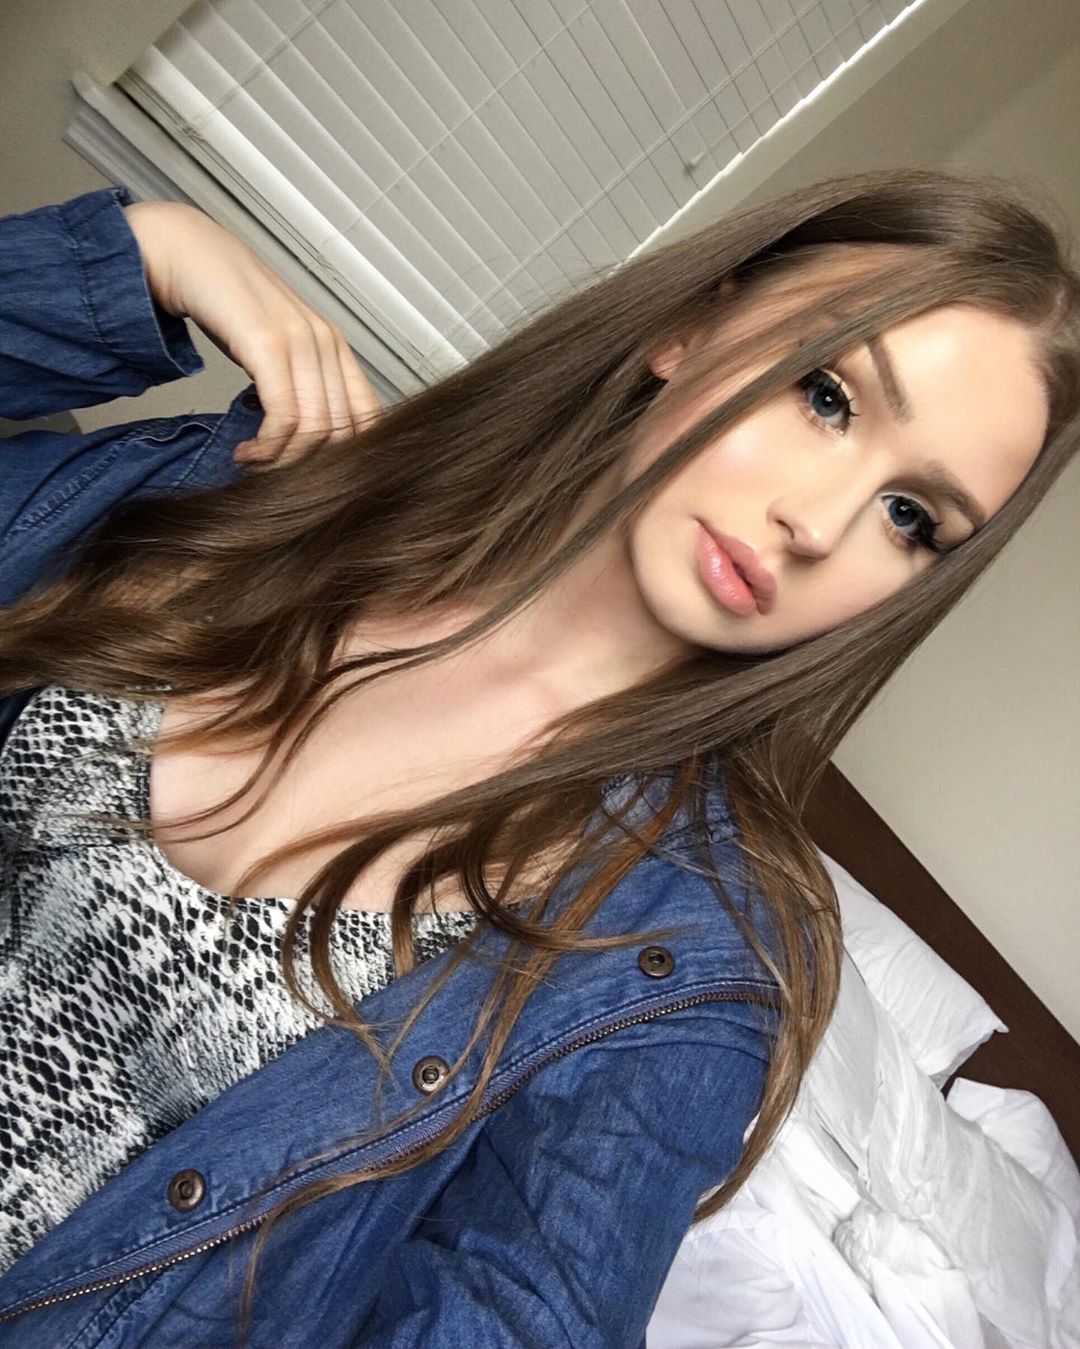 Victoria Taylor Most Beautiful Trans Girl Tg Beauty 